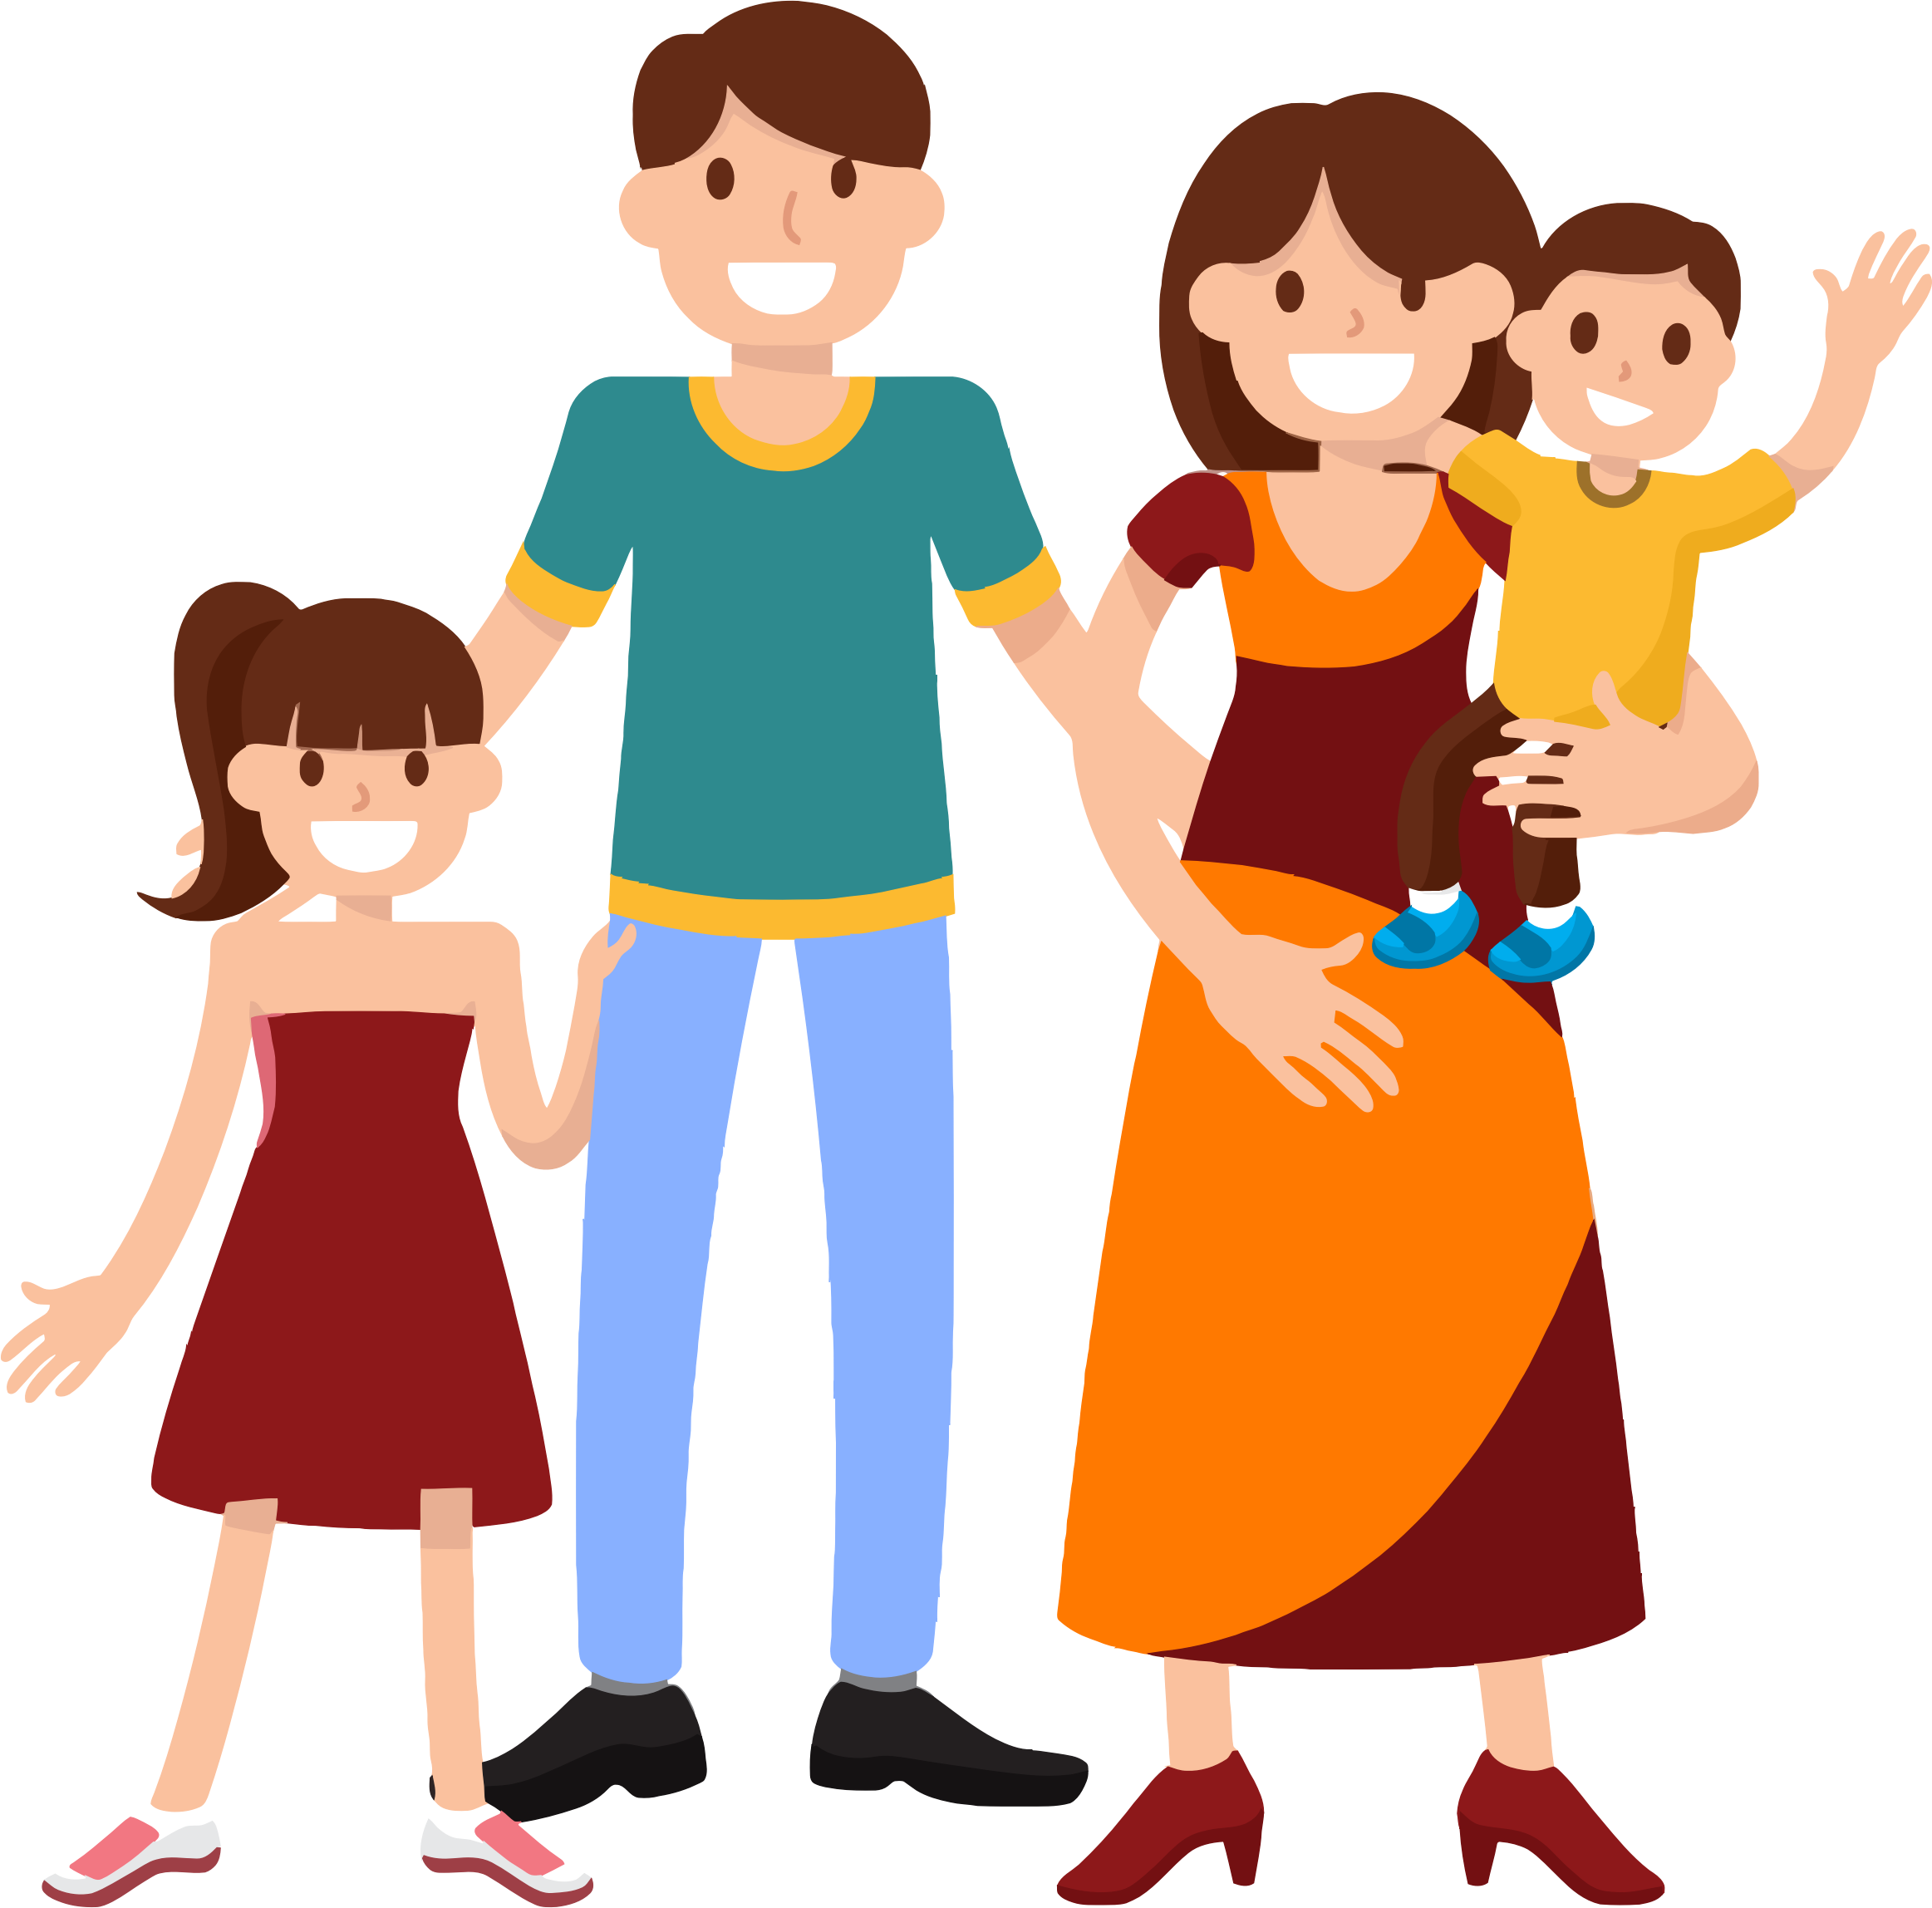 Family Smile Happiness Clip art